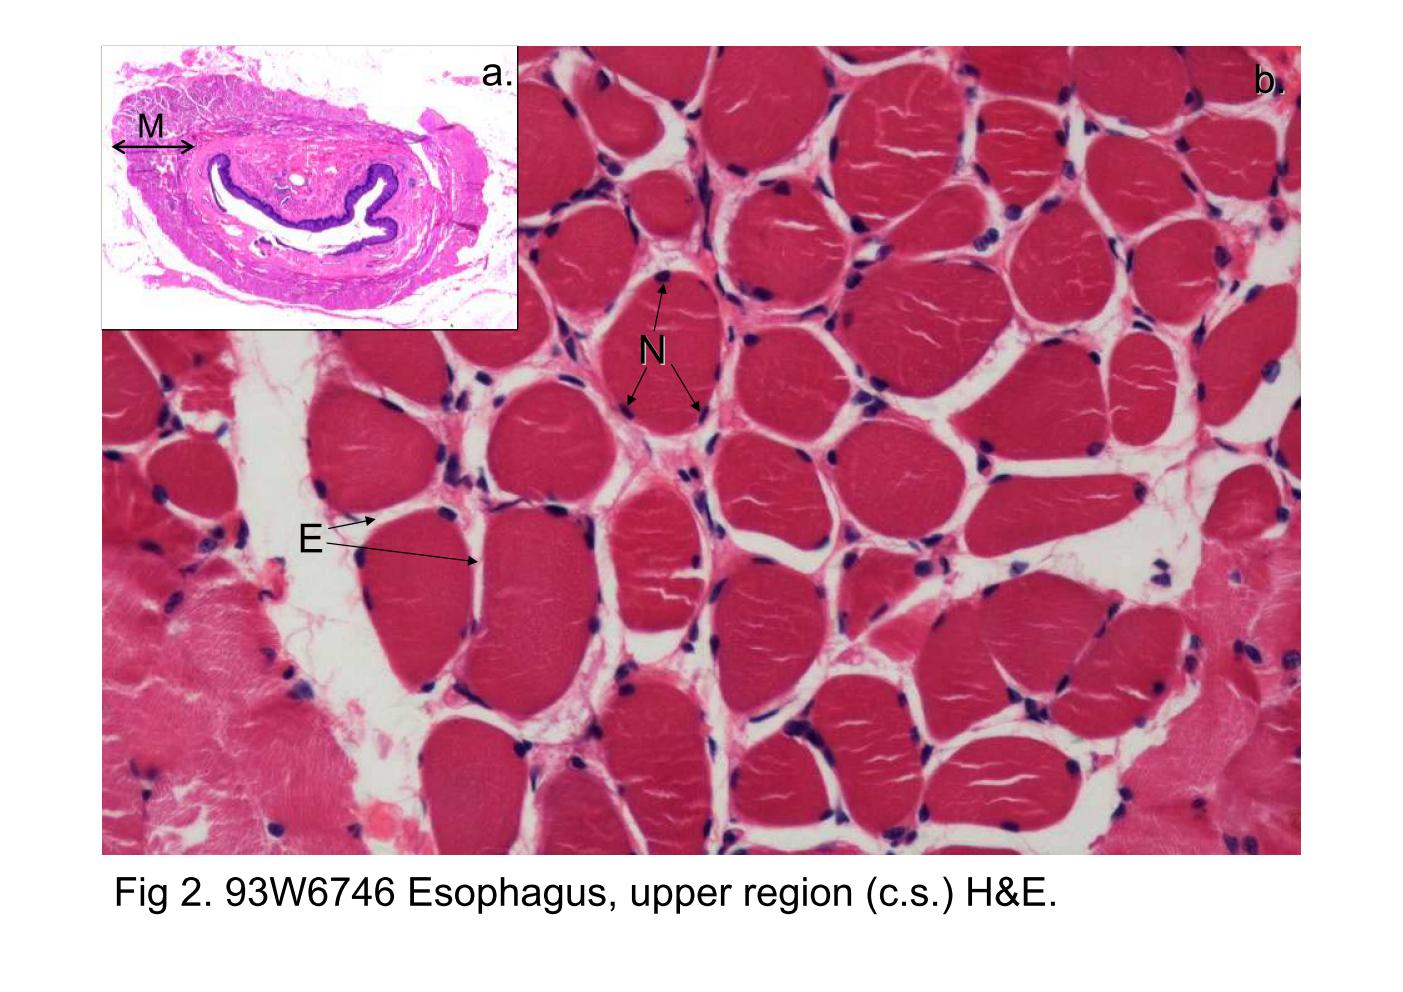 block6-2_07.jpg - Fig 2. 93W6746 Esophagus, upper region (c.s.) H&E.Fig 2a. The muscularis externa (M) of the upper portion of theesophagus belongs to the skeletal muscle, appearing the innercircular and outer longitudinal arrangement patterns.Fig 2b shows high-magnification of cross sectioned musclecells, appearing the polygonal profiles. Notice the numerous ofperipherally located multinuclei (N). Endomysium (E) is a layerof basal lamina, surrounding each individual muscle fibers.            Skeletal muscle